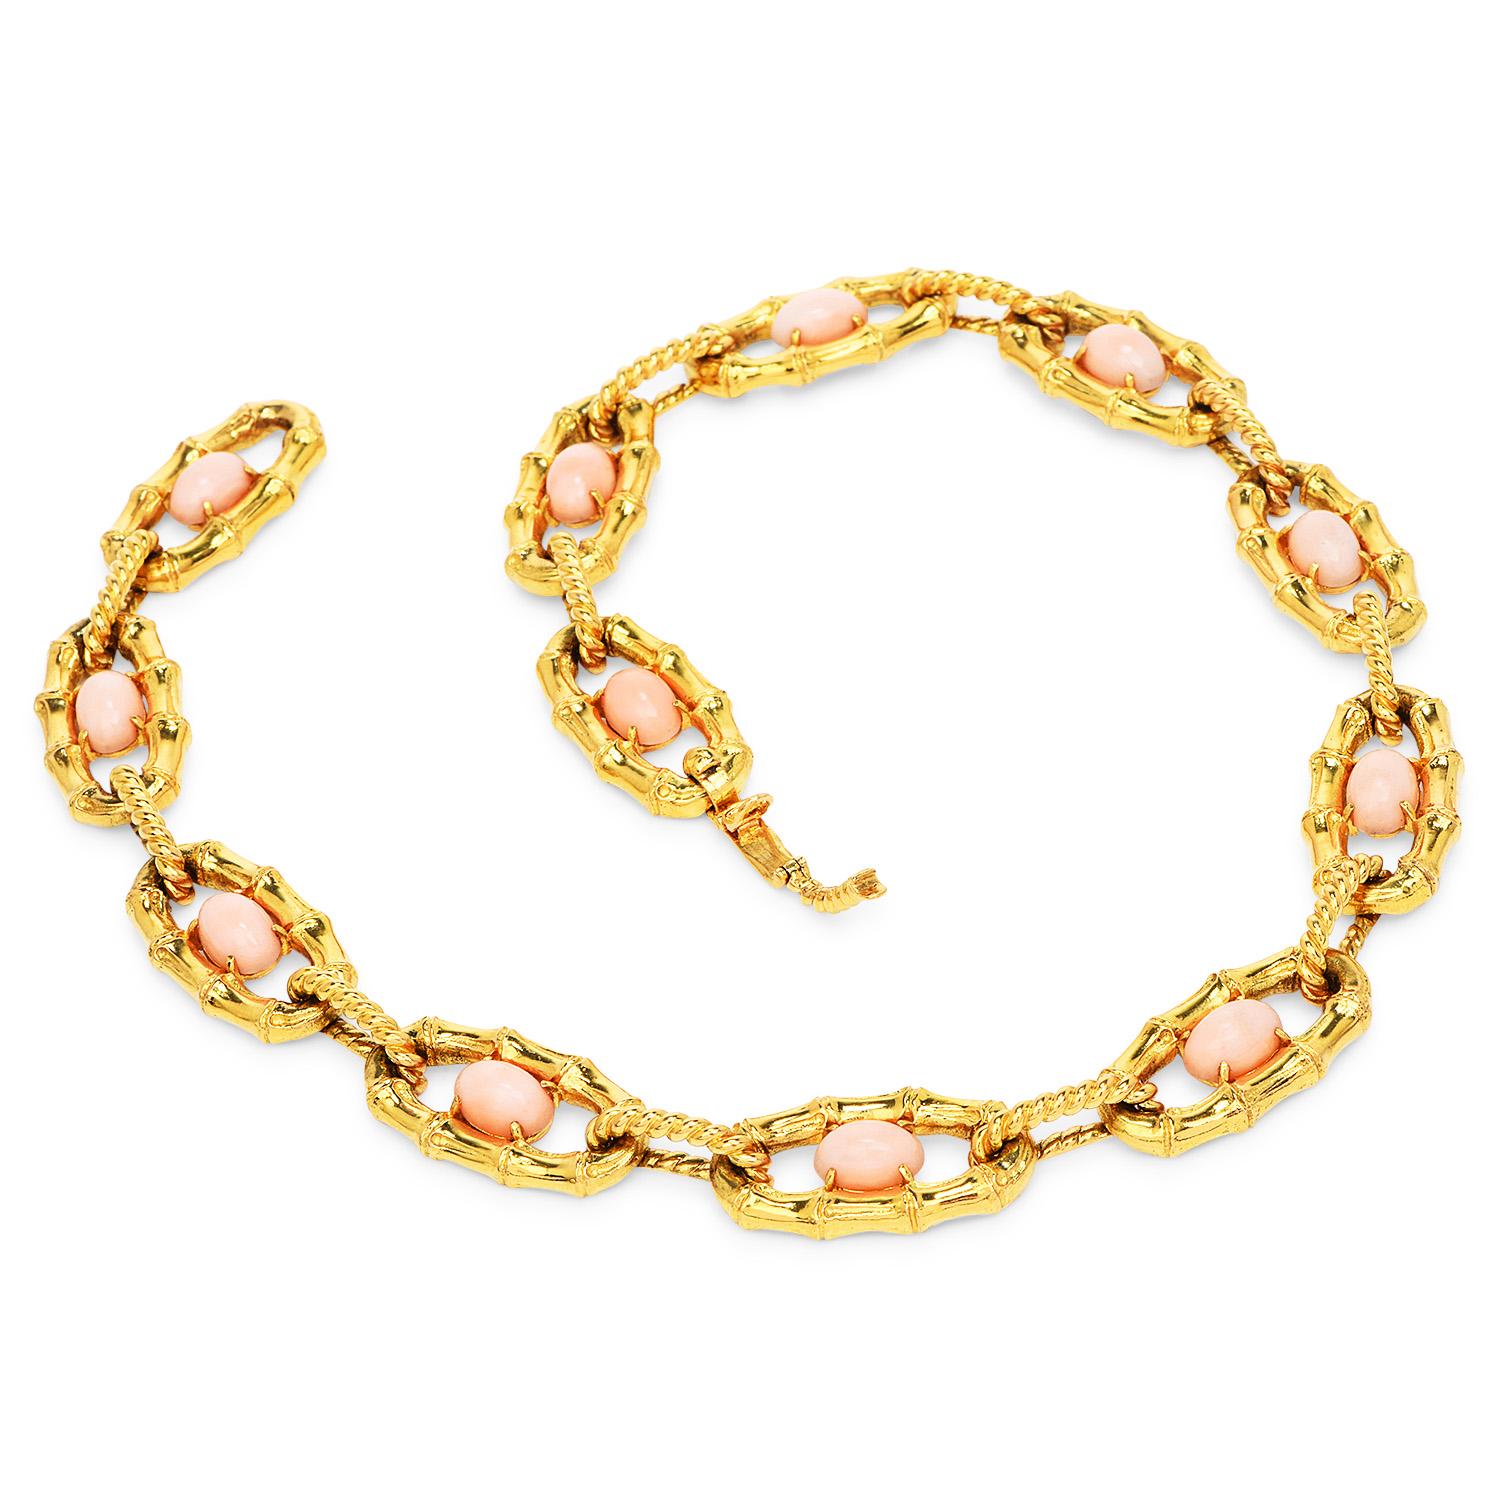 A high-quality link necklace, made in France.

Exquisite textured with bamboo & rope link design, from circa 1980s, a pink coral piece crafted in solid 18K yellow gold.

Centered by 12 cabochons oval cut genuine pink Coral, measuring 10 mm x 6 mm x